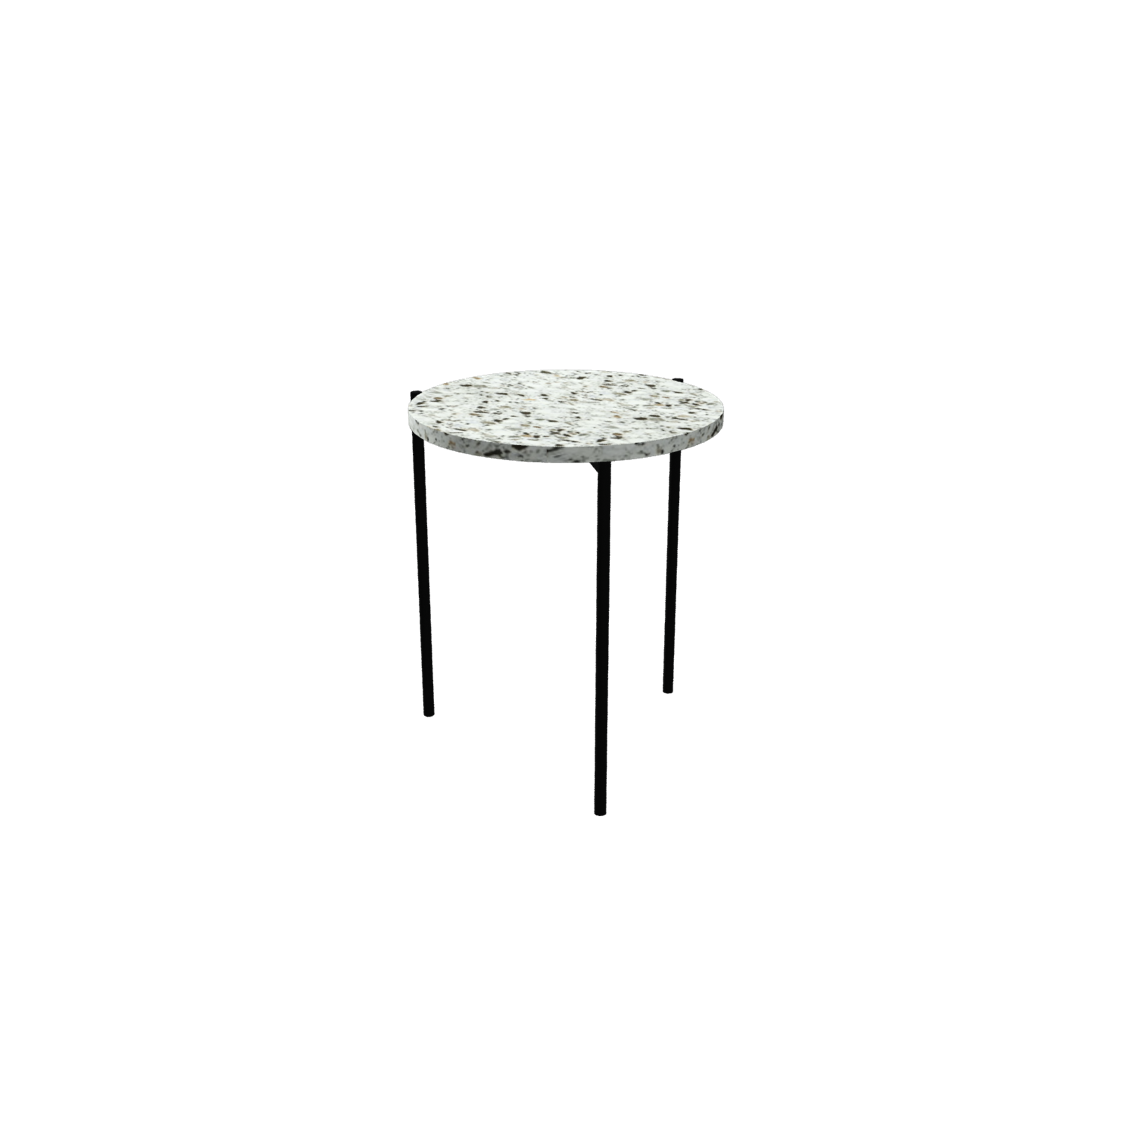 SIDE TABLE, ROUND - Customer's Product with price 1800.00 ID MvTMfIhw1mYIuYsjD-hgeL3I